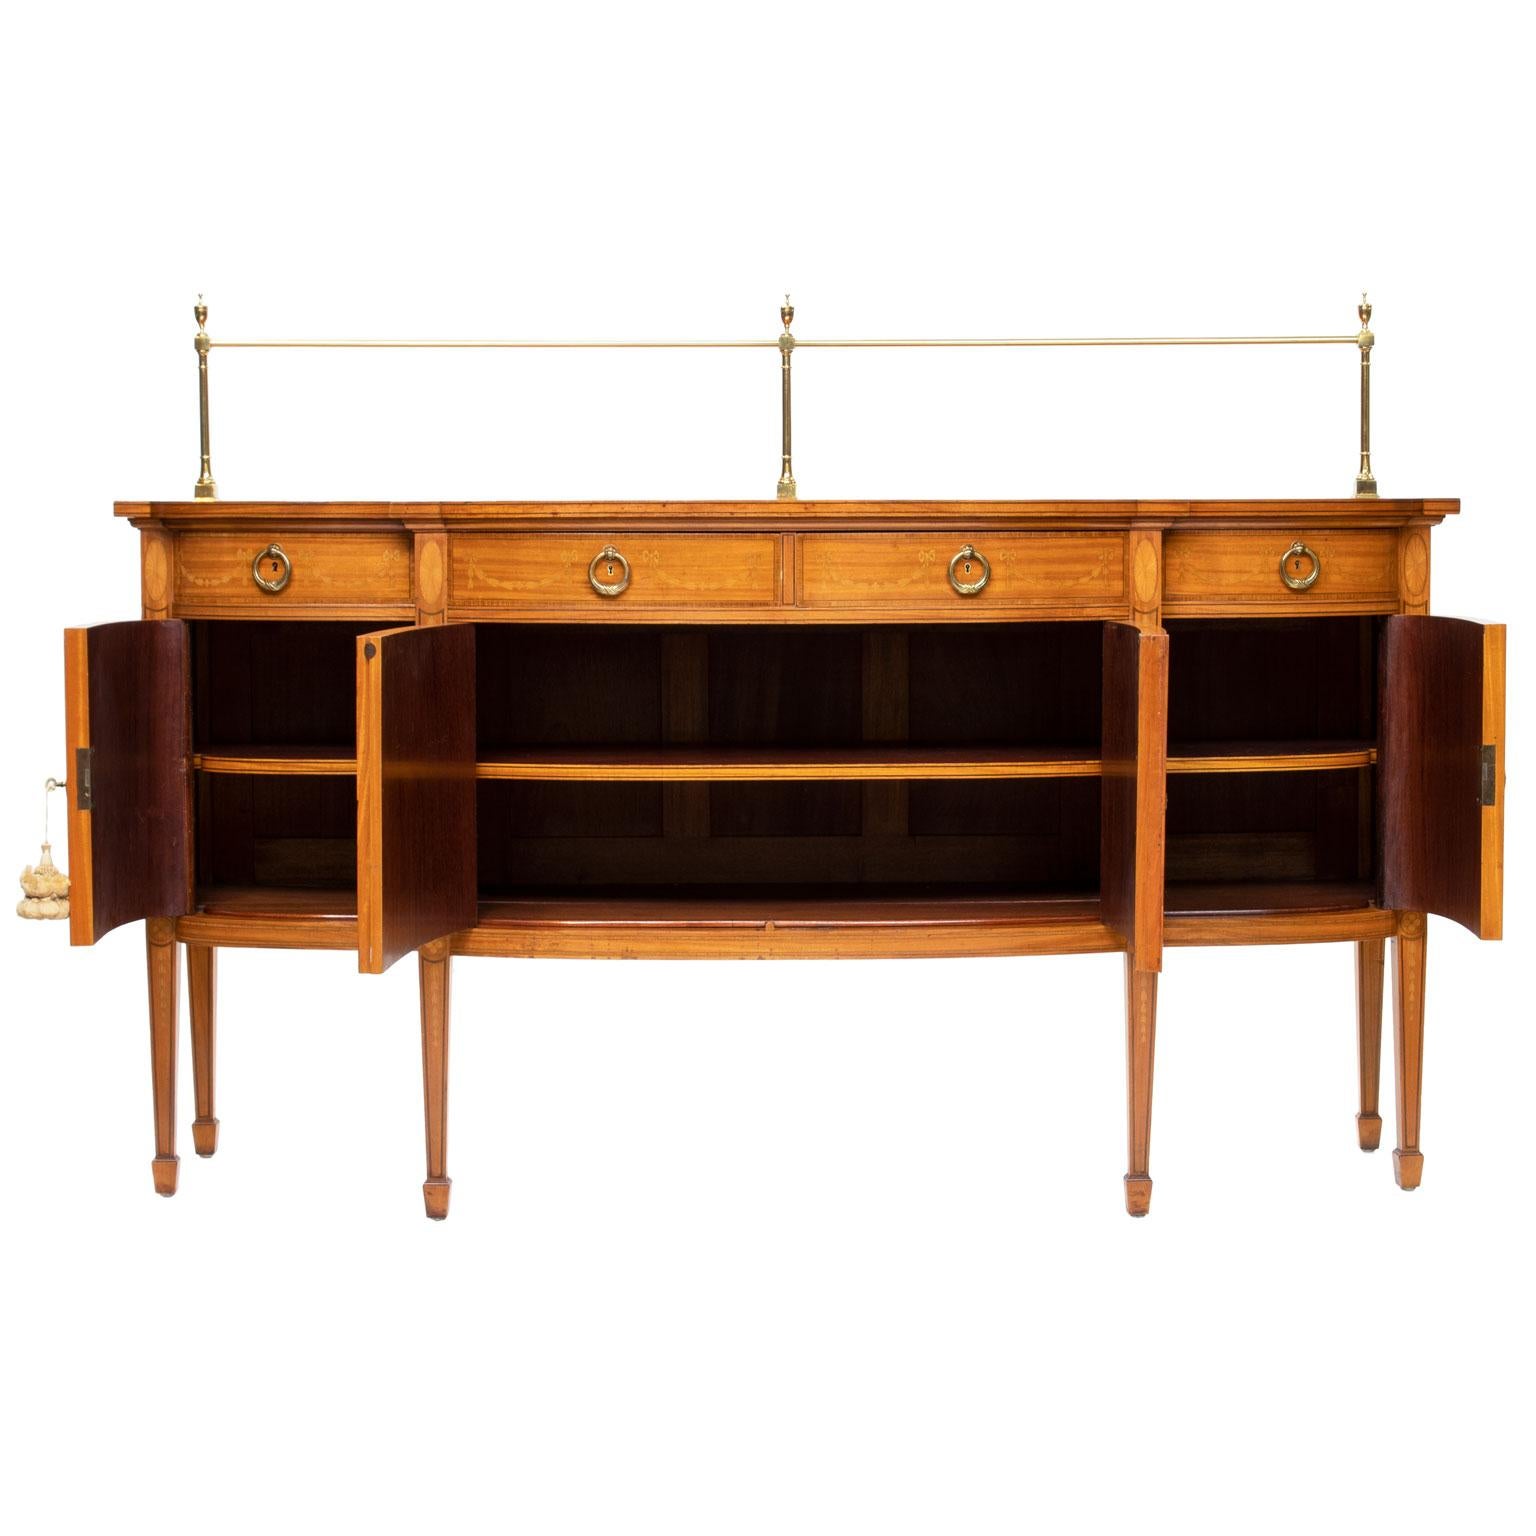 A superb 19th century Sheraton satinwood inlaid sideboard with brass gallery. The sideboard has a shaped breakfront. Very intricate inlay. There are three drawers with round laurel pulls above four-door with shelves. Each shelf finished and fronts